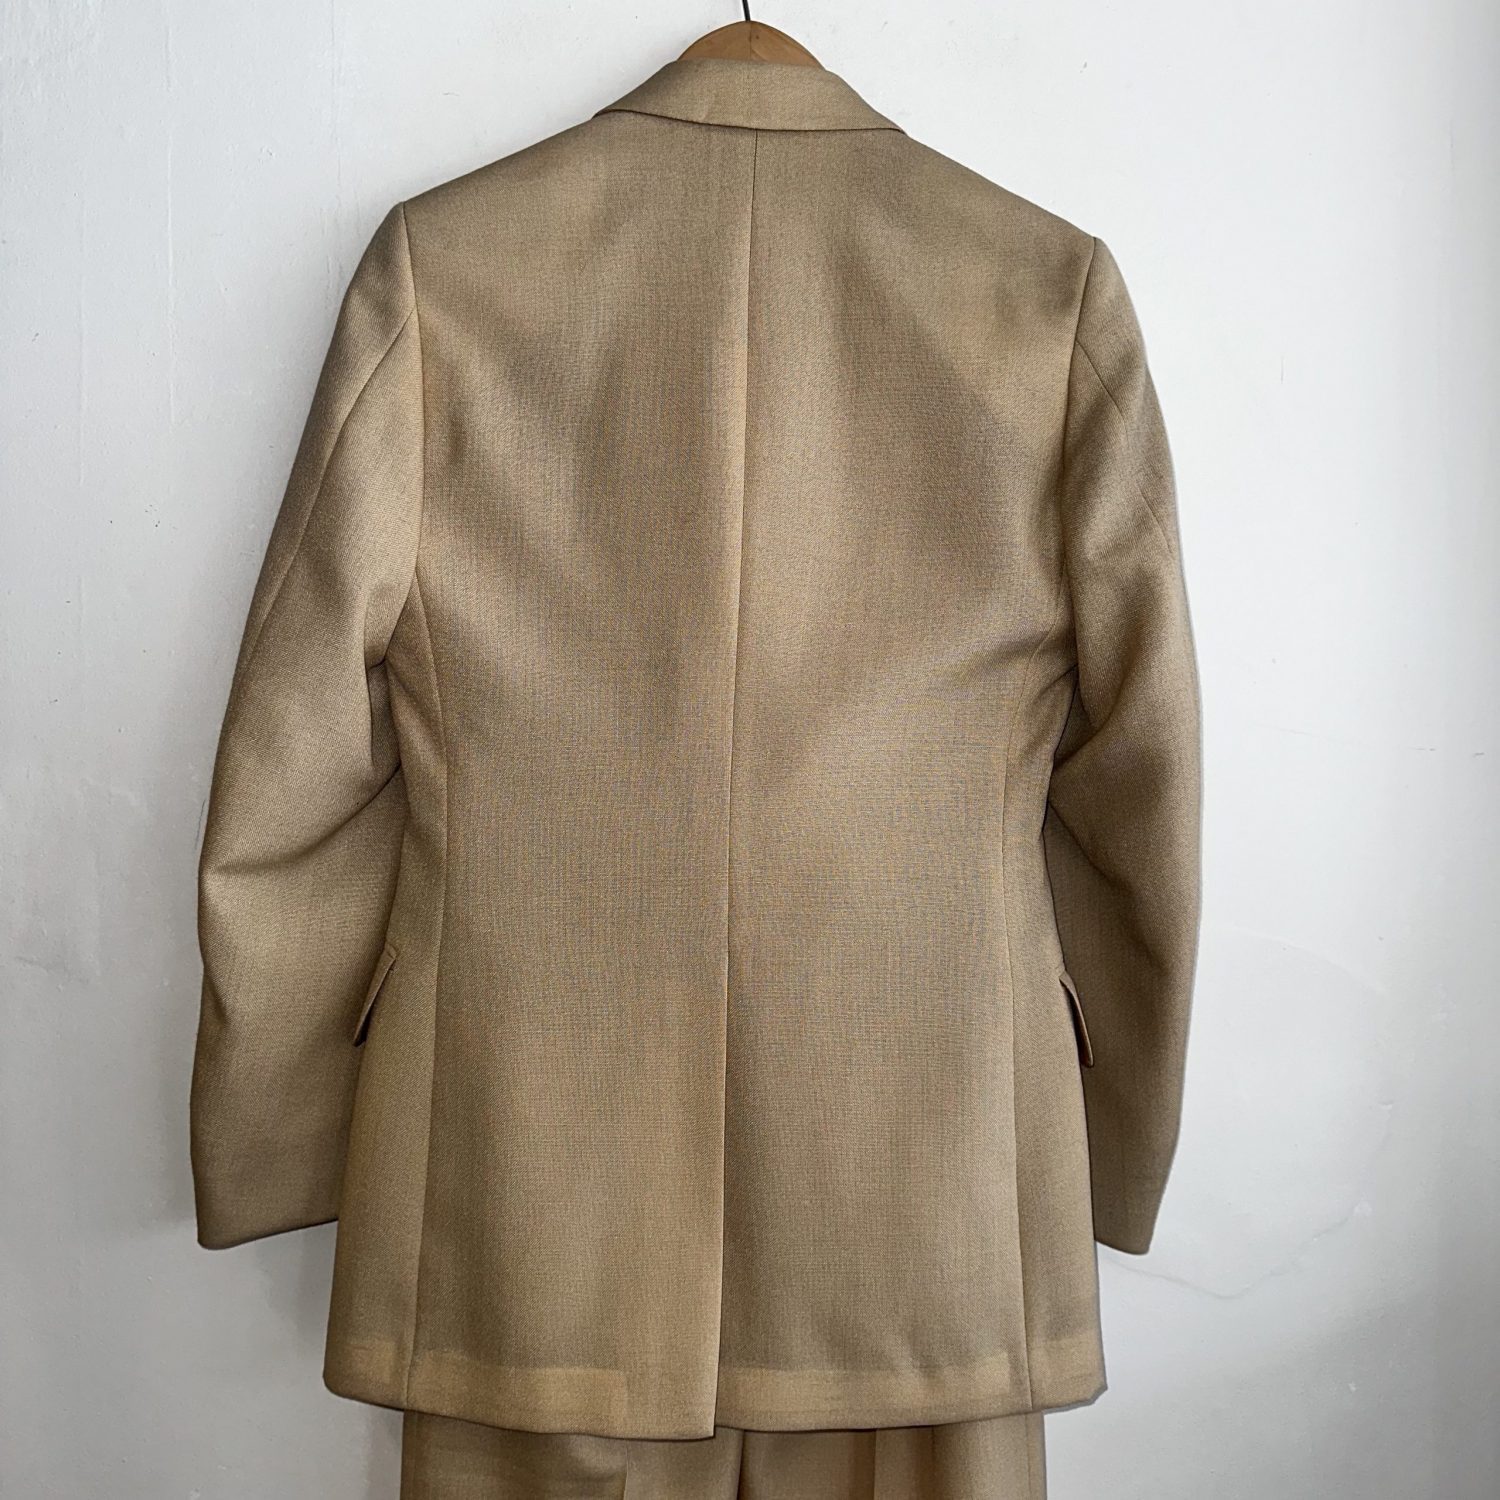 HIGH-QUALITY VINTAGE 70s TAN 2PC 'SHAWS' DEADSTOCK MENS SUIT | Chaos ...